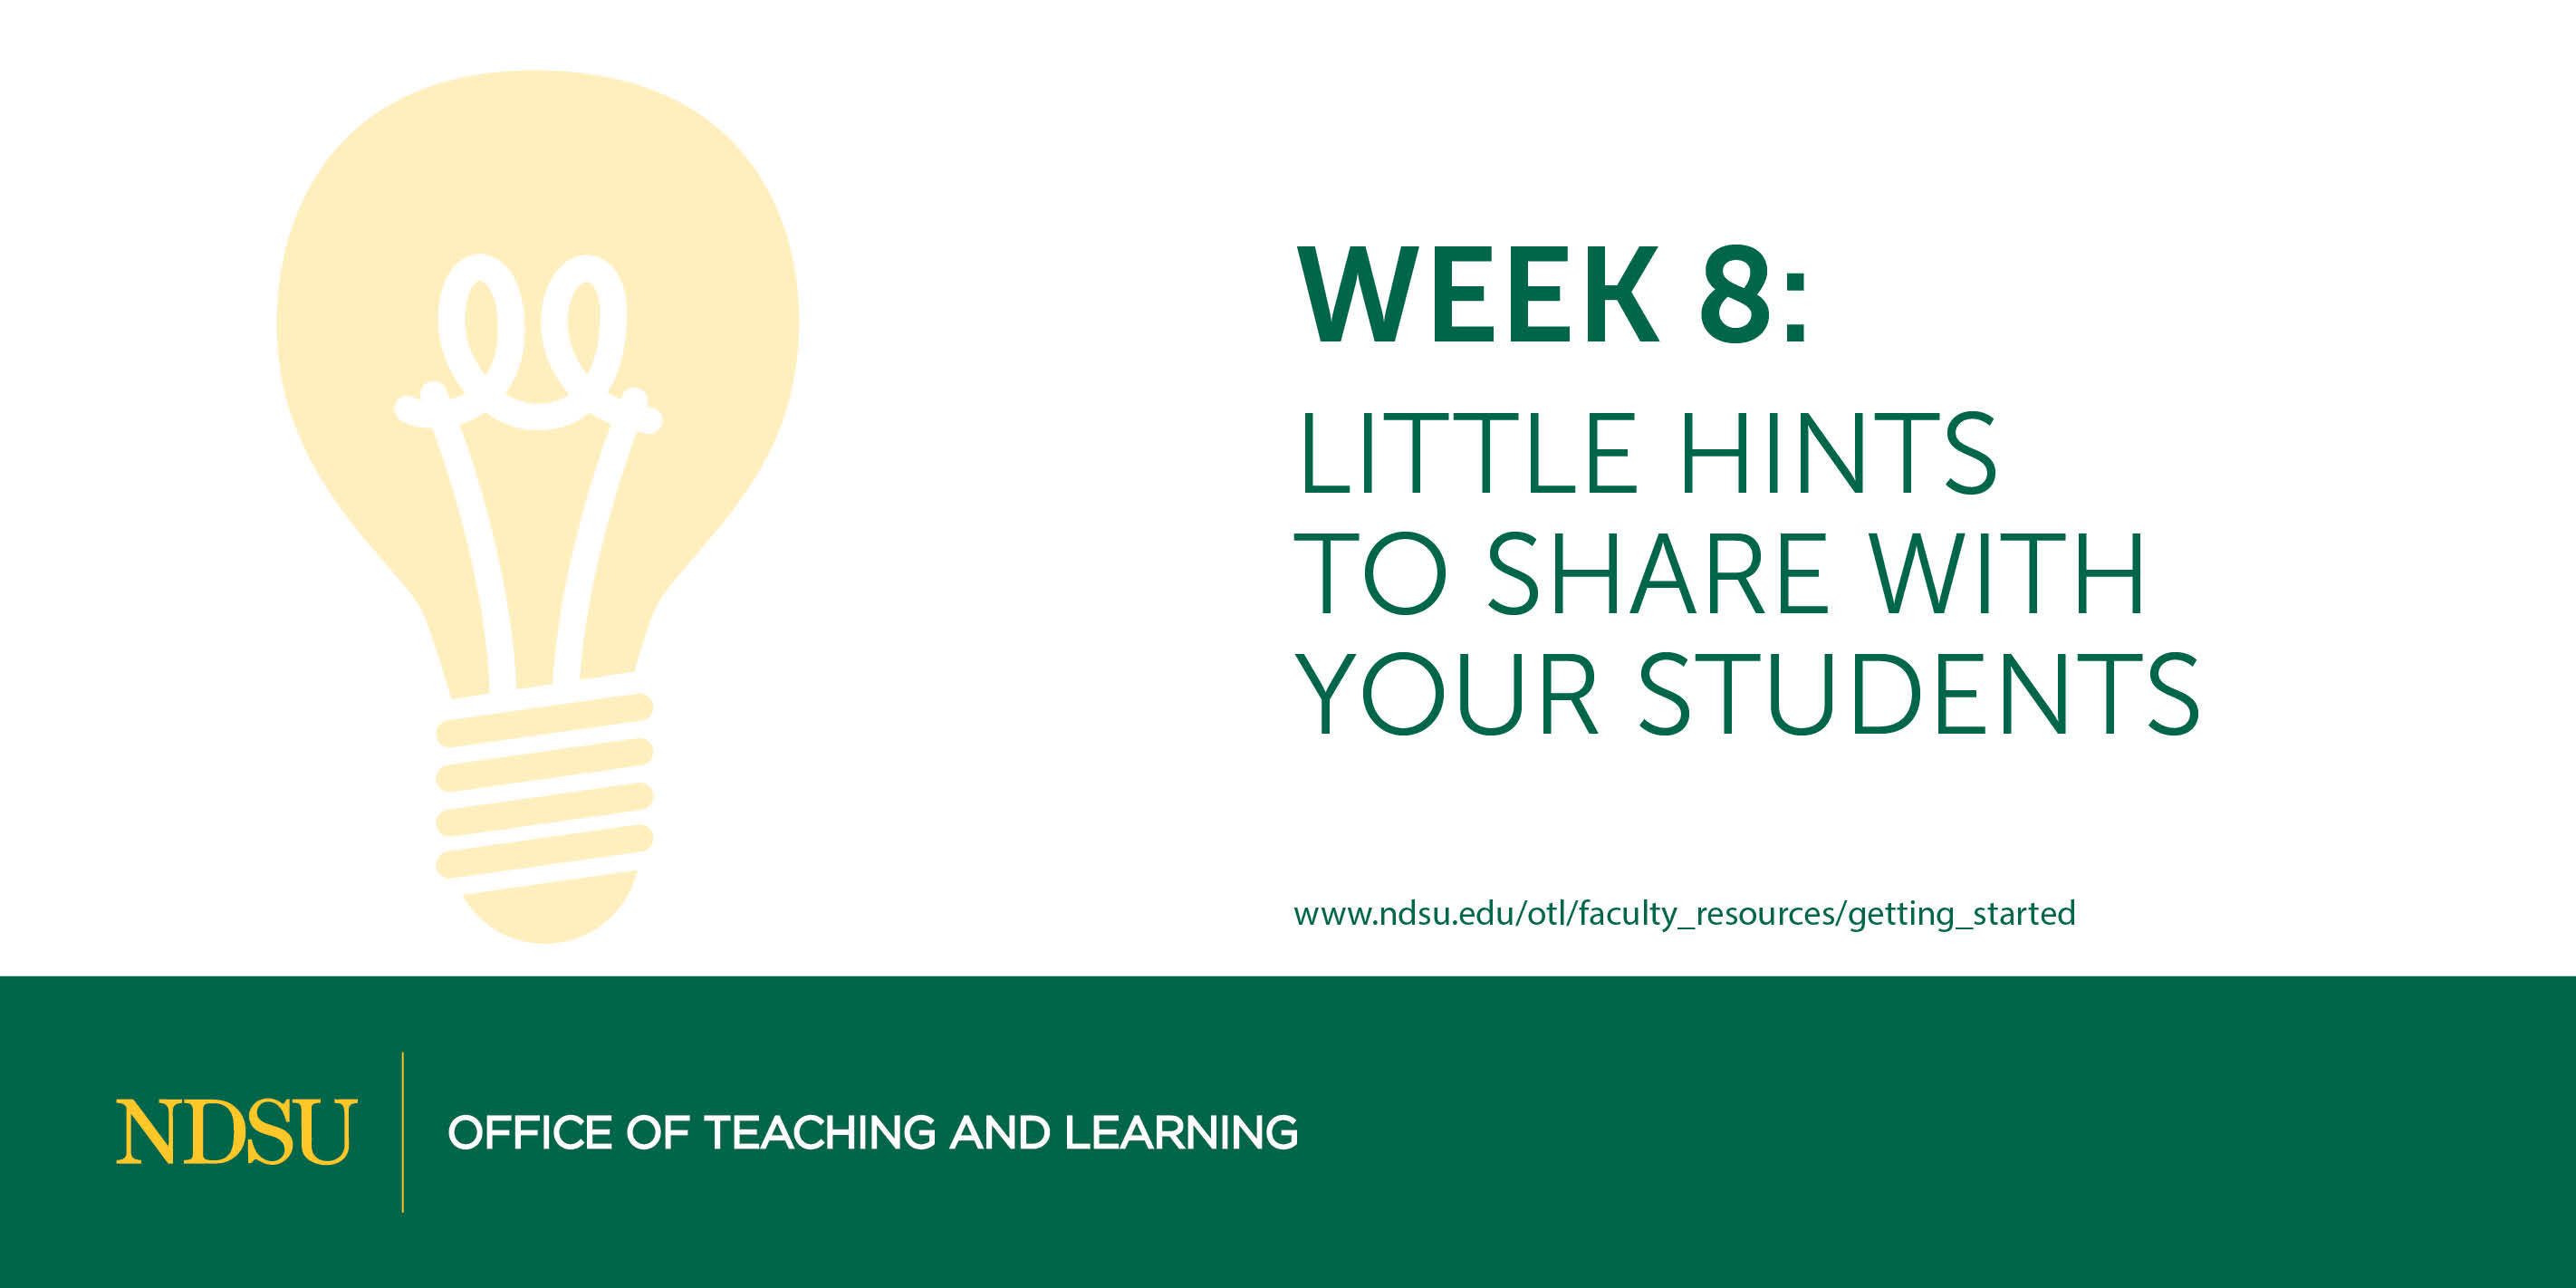 Week 8: Little Hints for Students